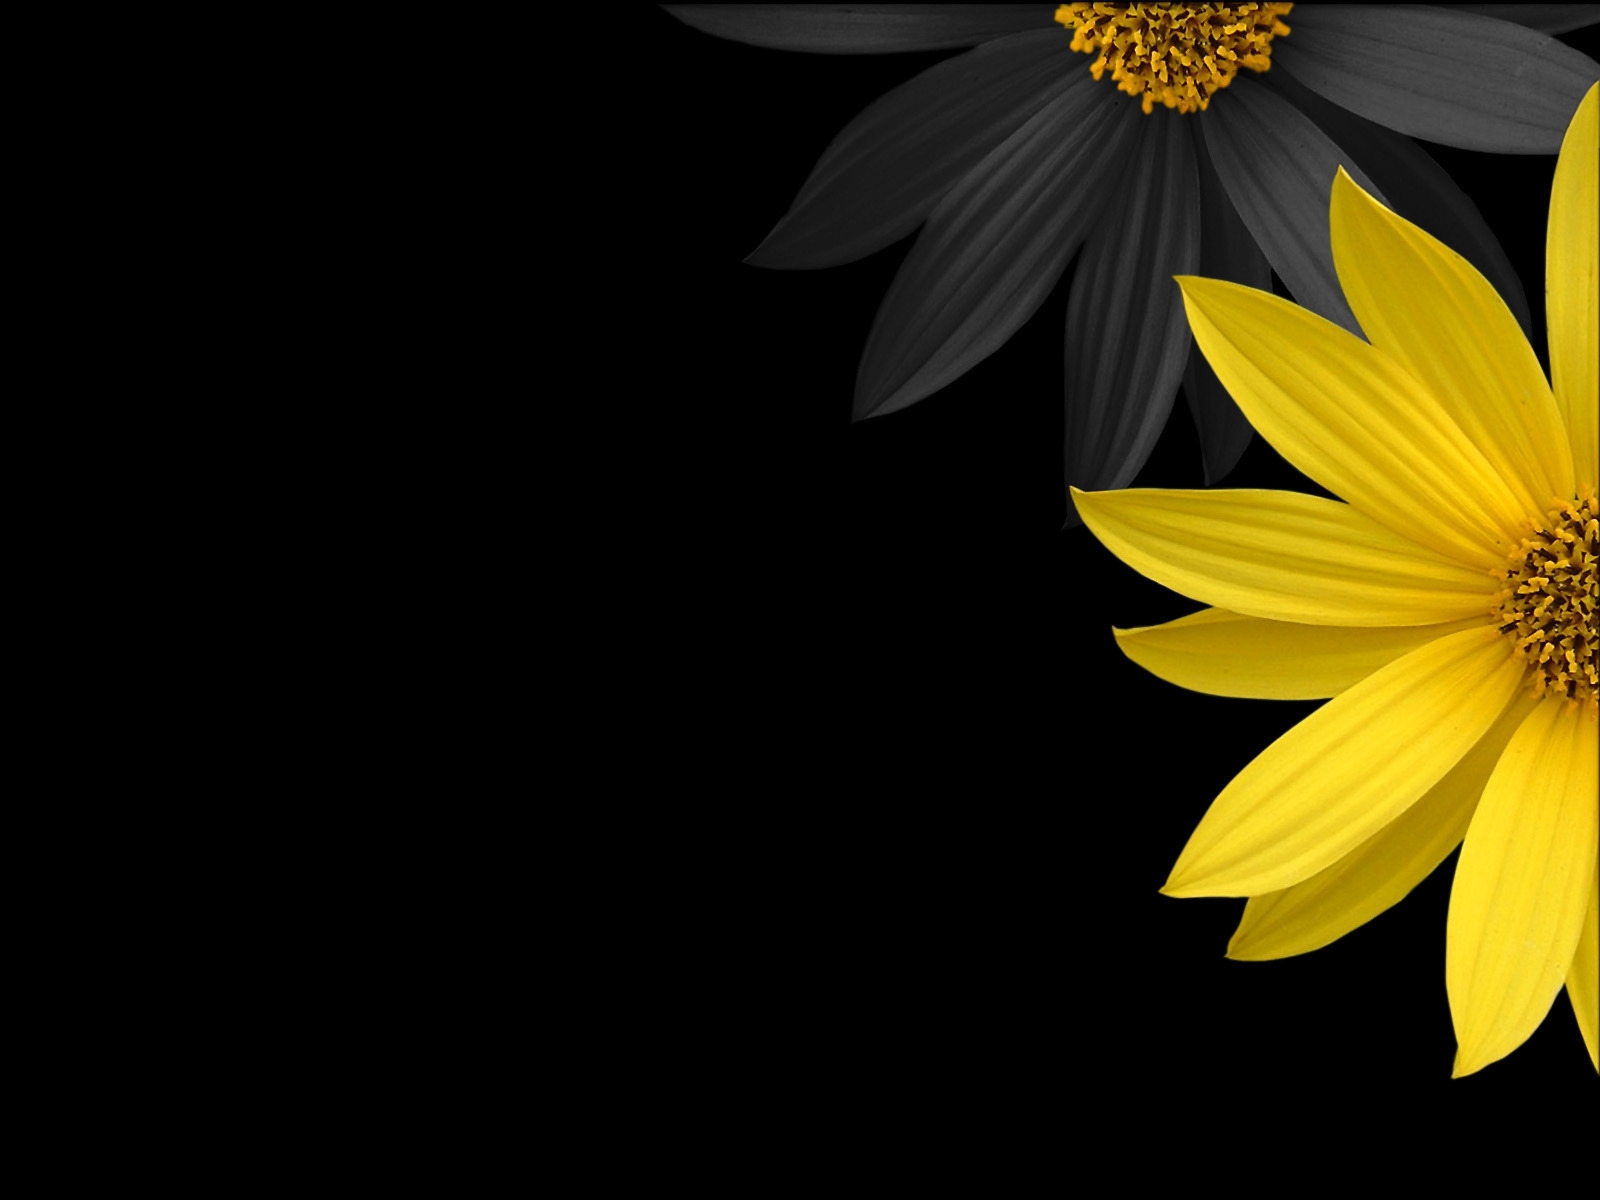 Simple Flower for 1600 x 1200 resolution